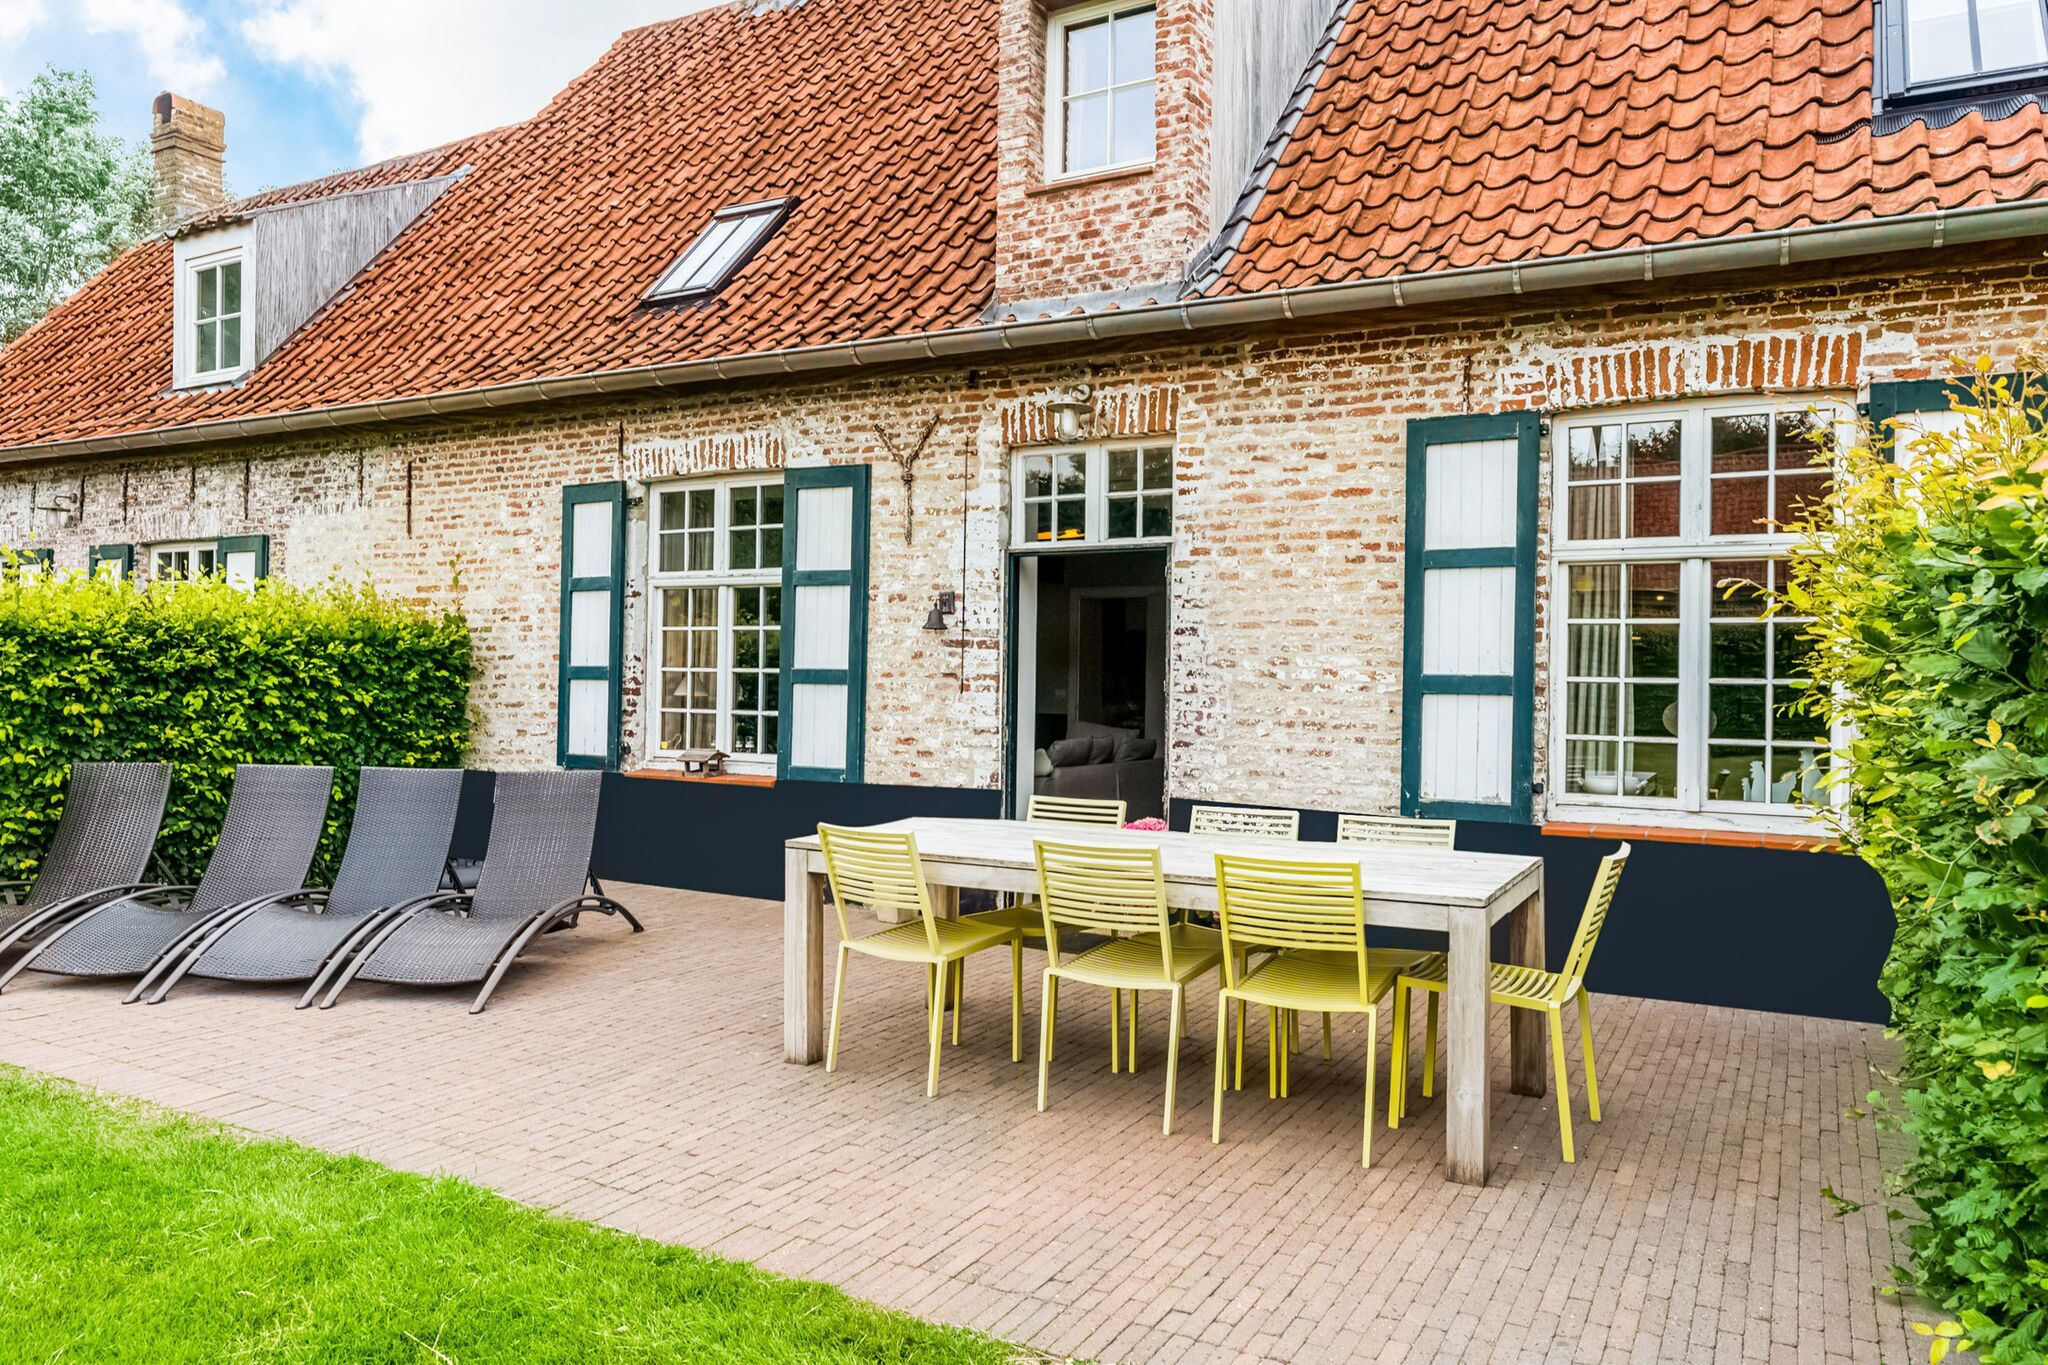 Historic Farmhouse in the middle of polder landscape, Damme